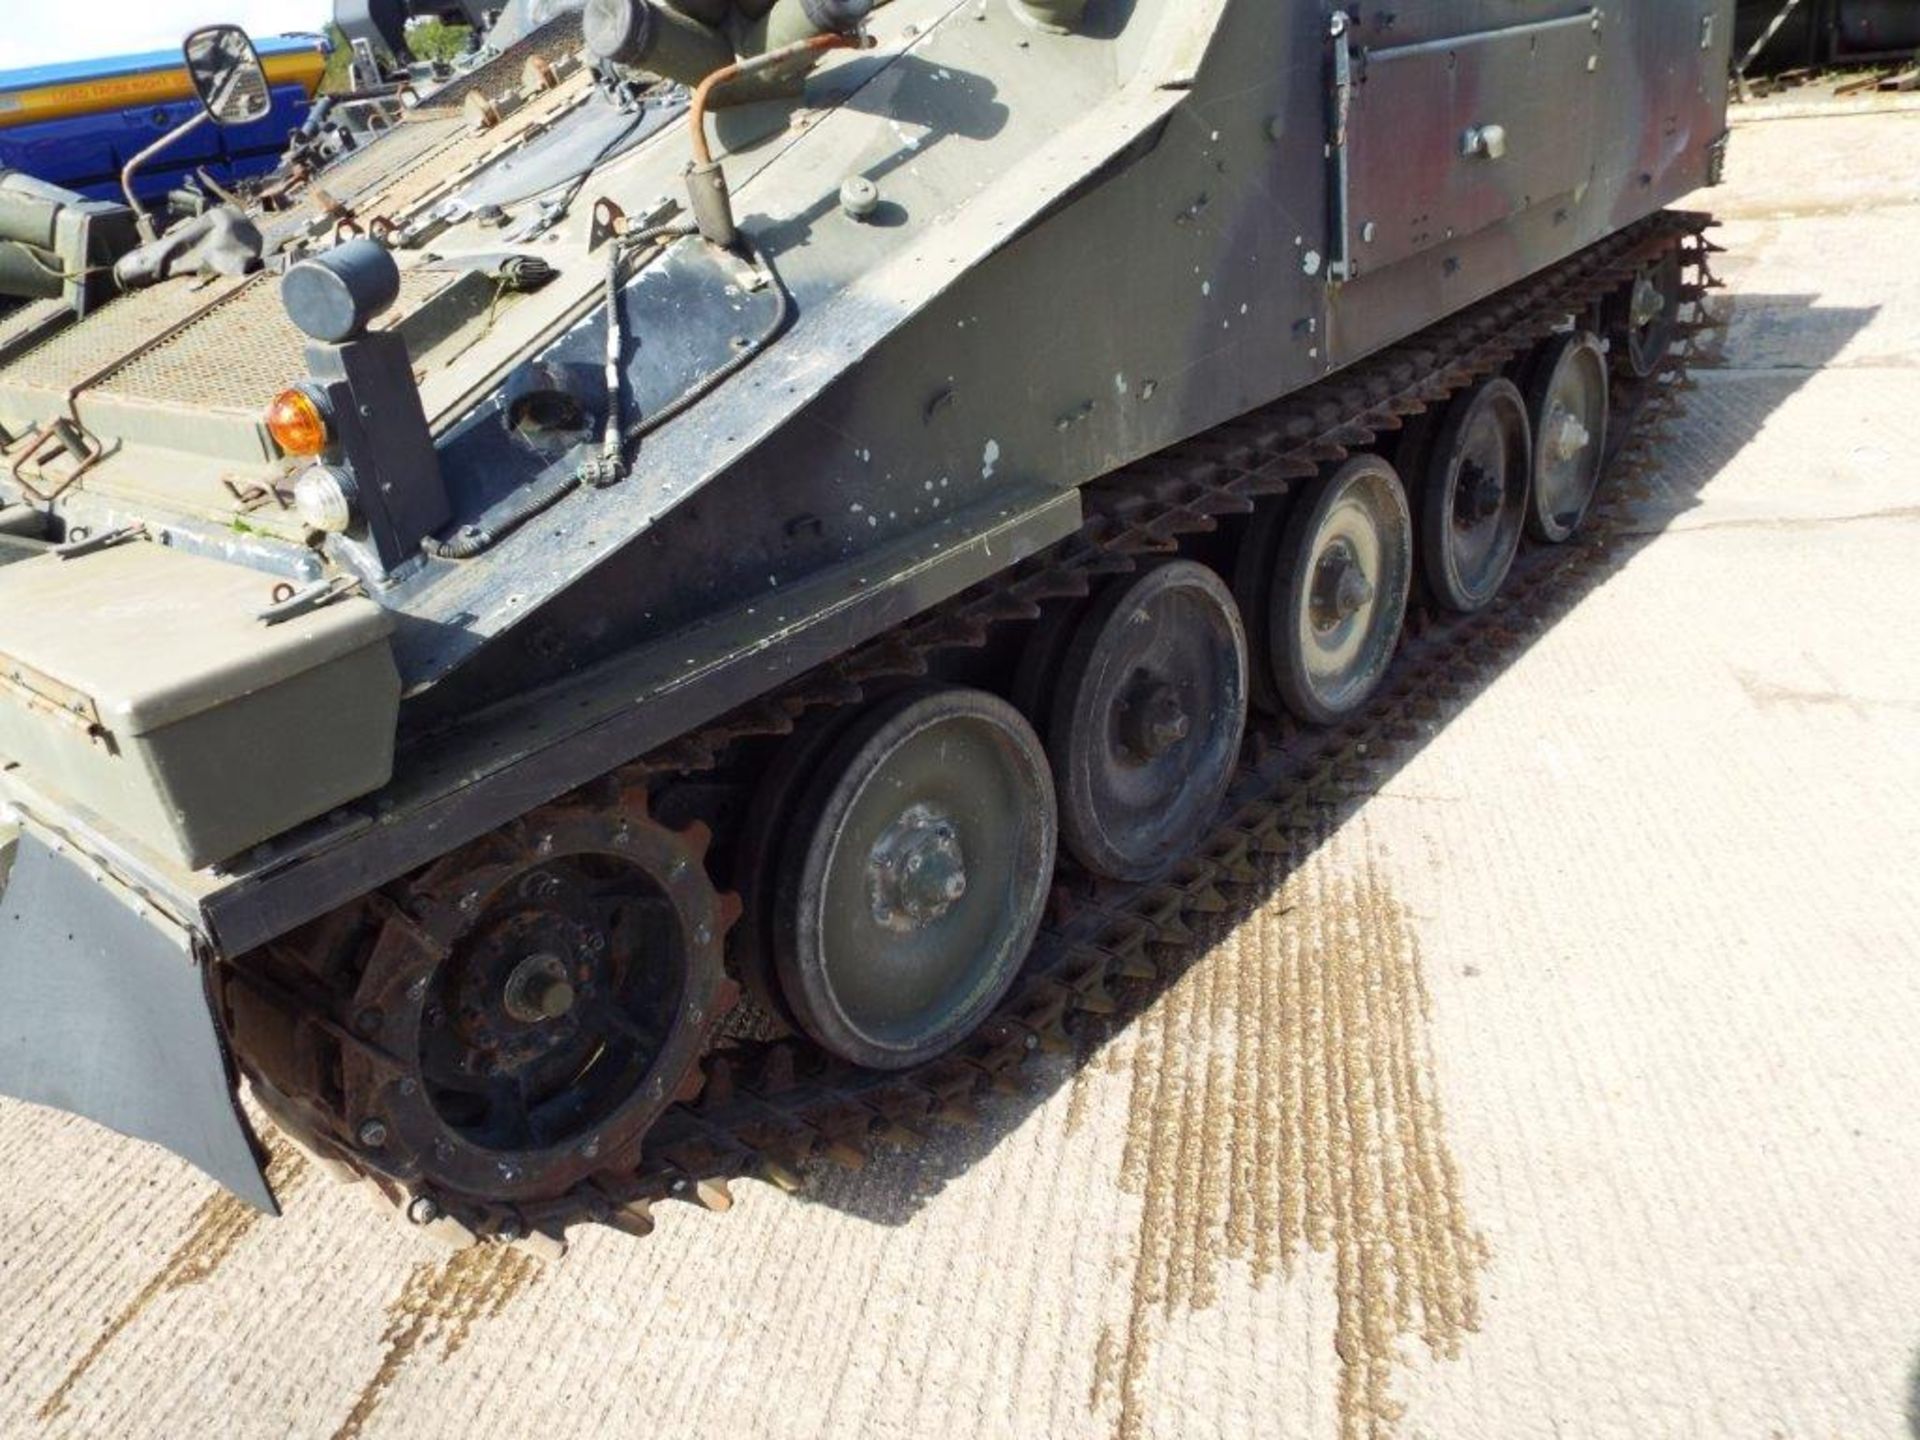 CVRT (Combat Vehicle Reconnaissance Tracked) FV105 Sultan Armoured Personnel Carrier - Image 17 of 32